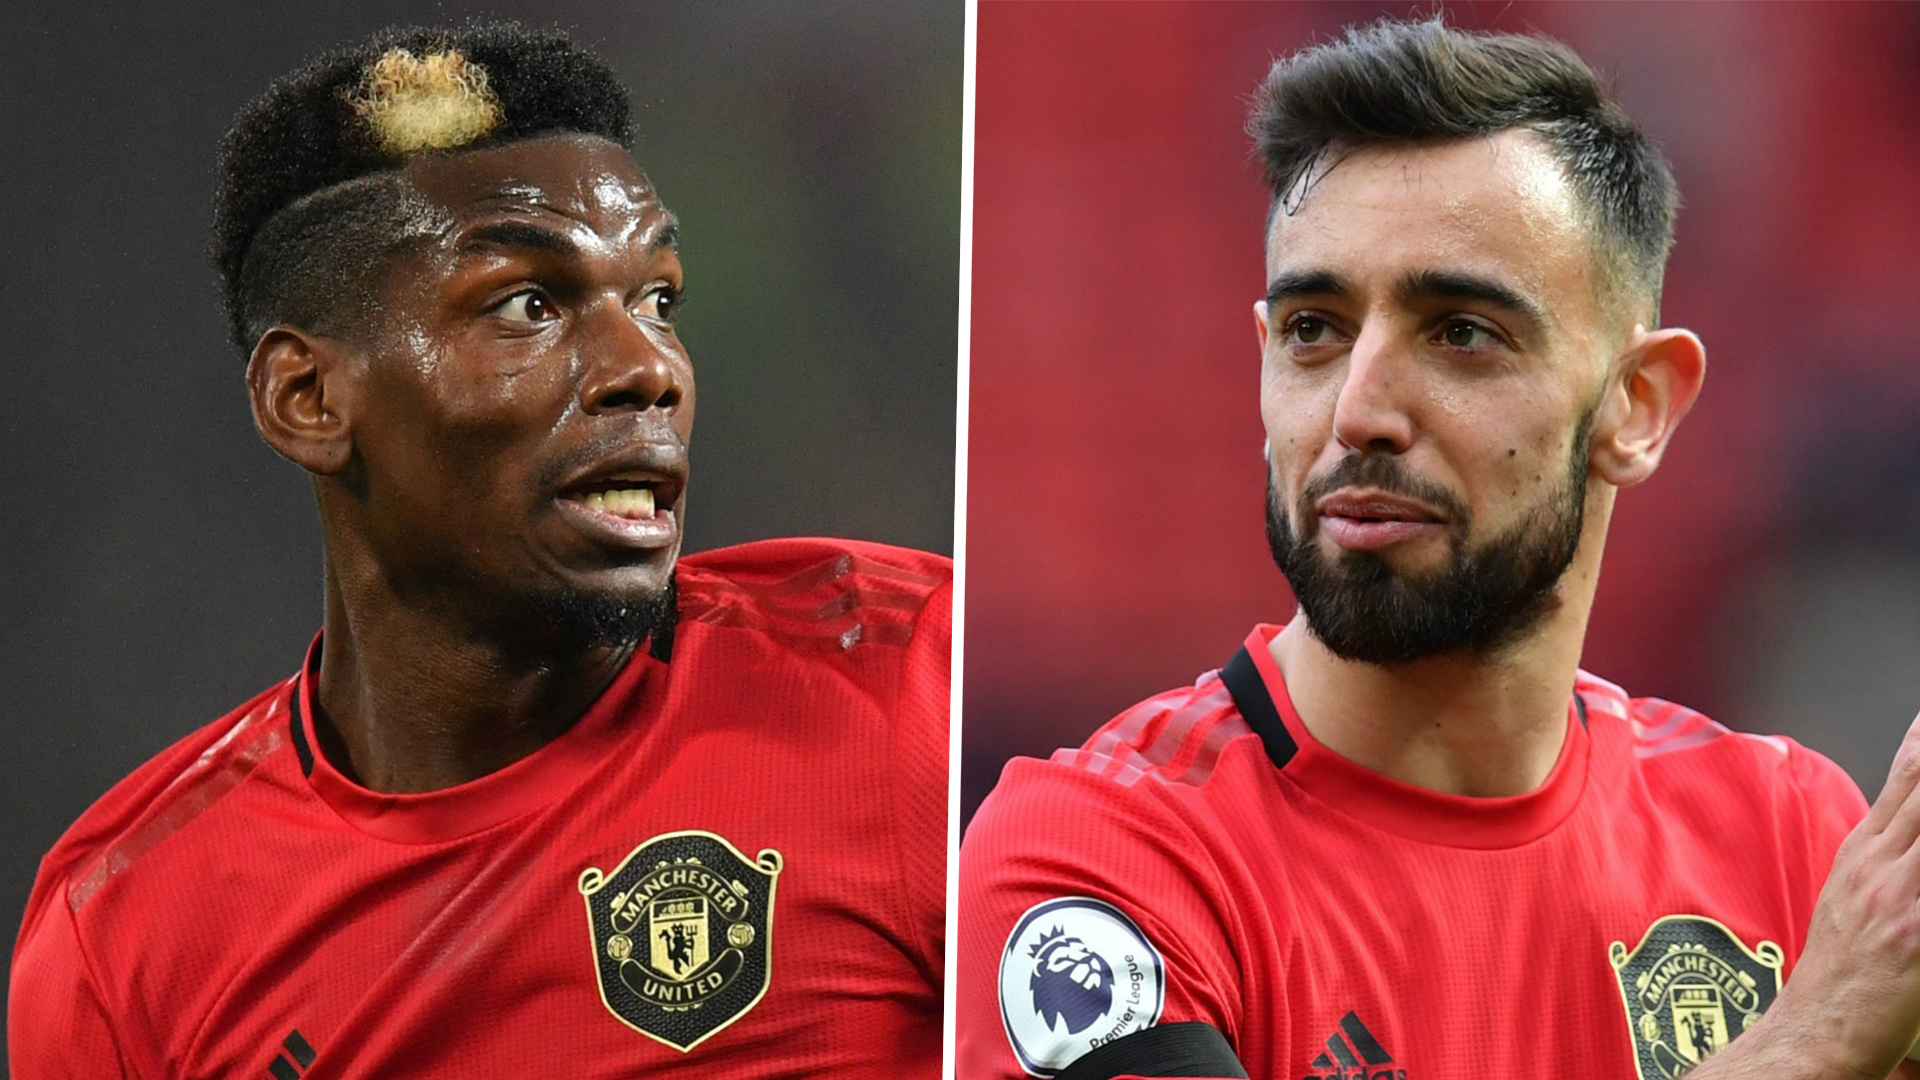 'Good players should be able to play with each other' - Giggs hoping Pogba & Fernandes pairing works out for Man Utd